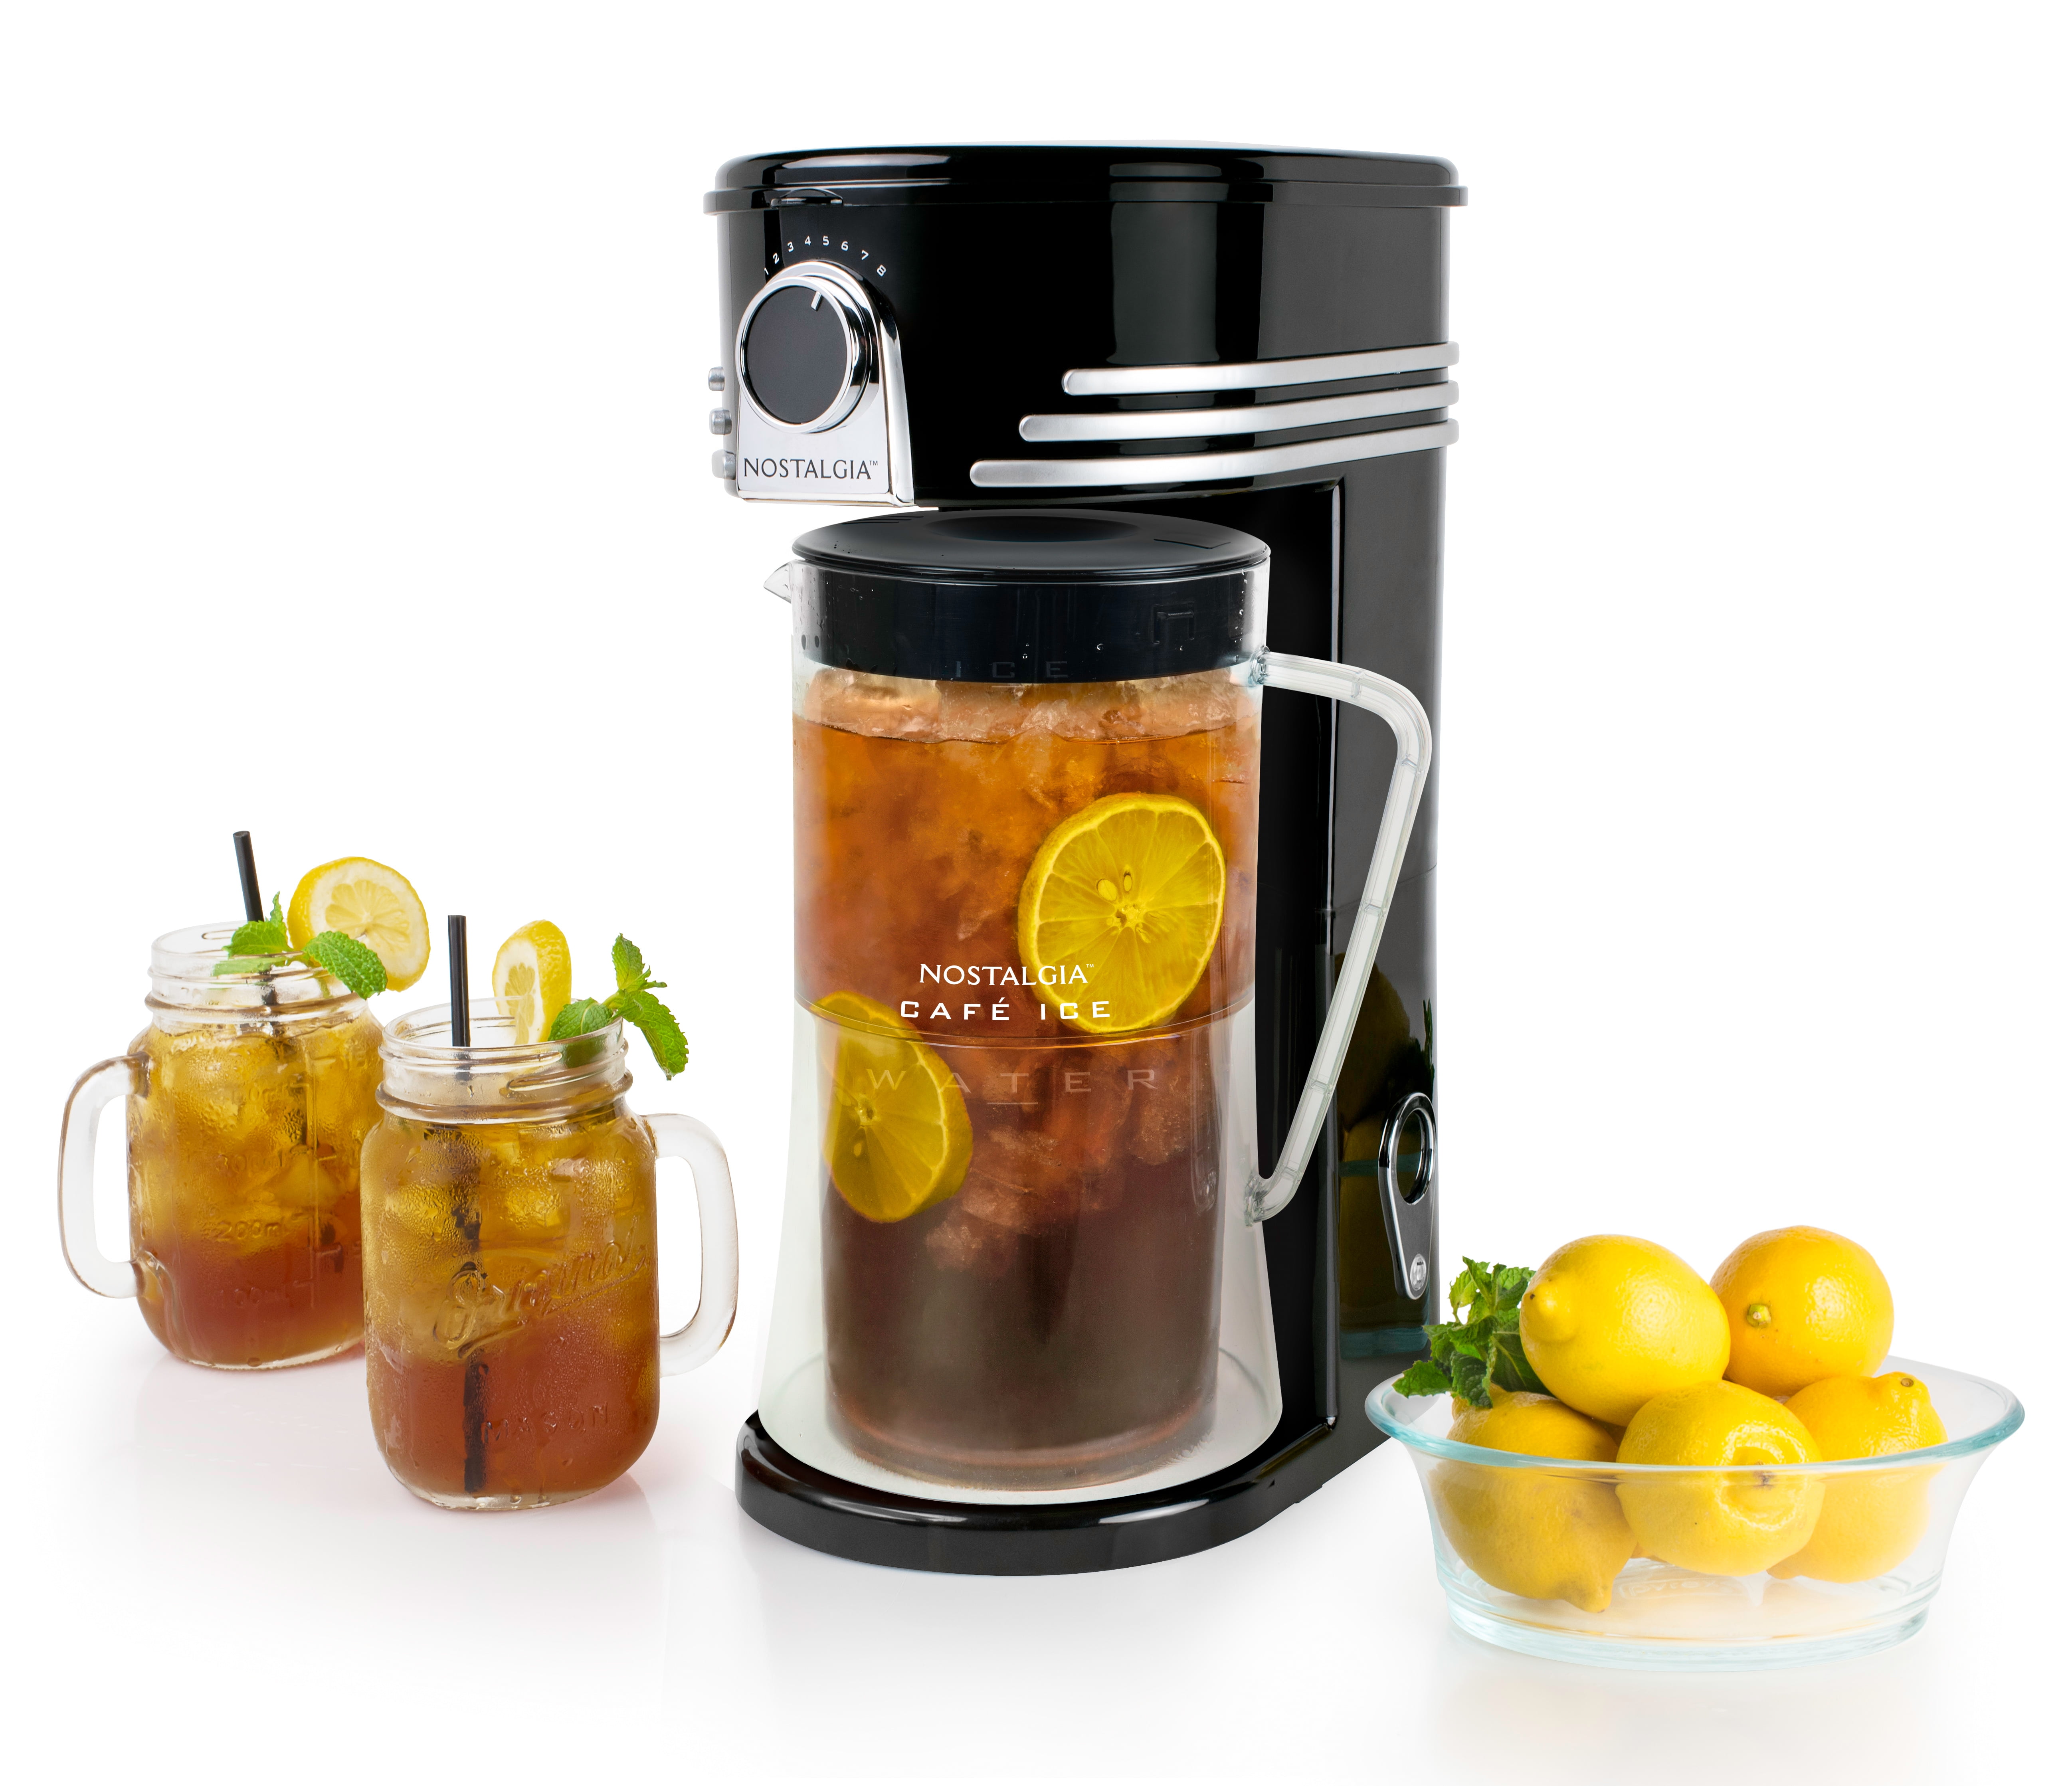 SUNVIVI 3 Quart Iced Tea Coffee Maker with Glass Pitcher,Iced Tea Coffee  Maker with Strength Selector,Stainless Steel, Black 